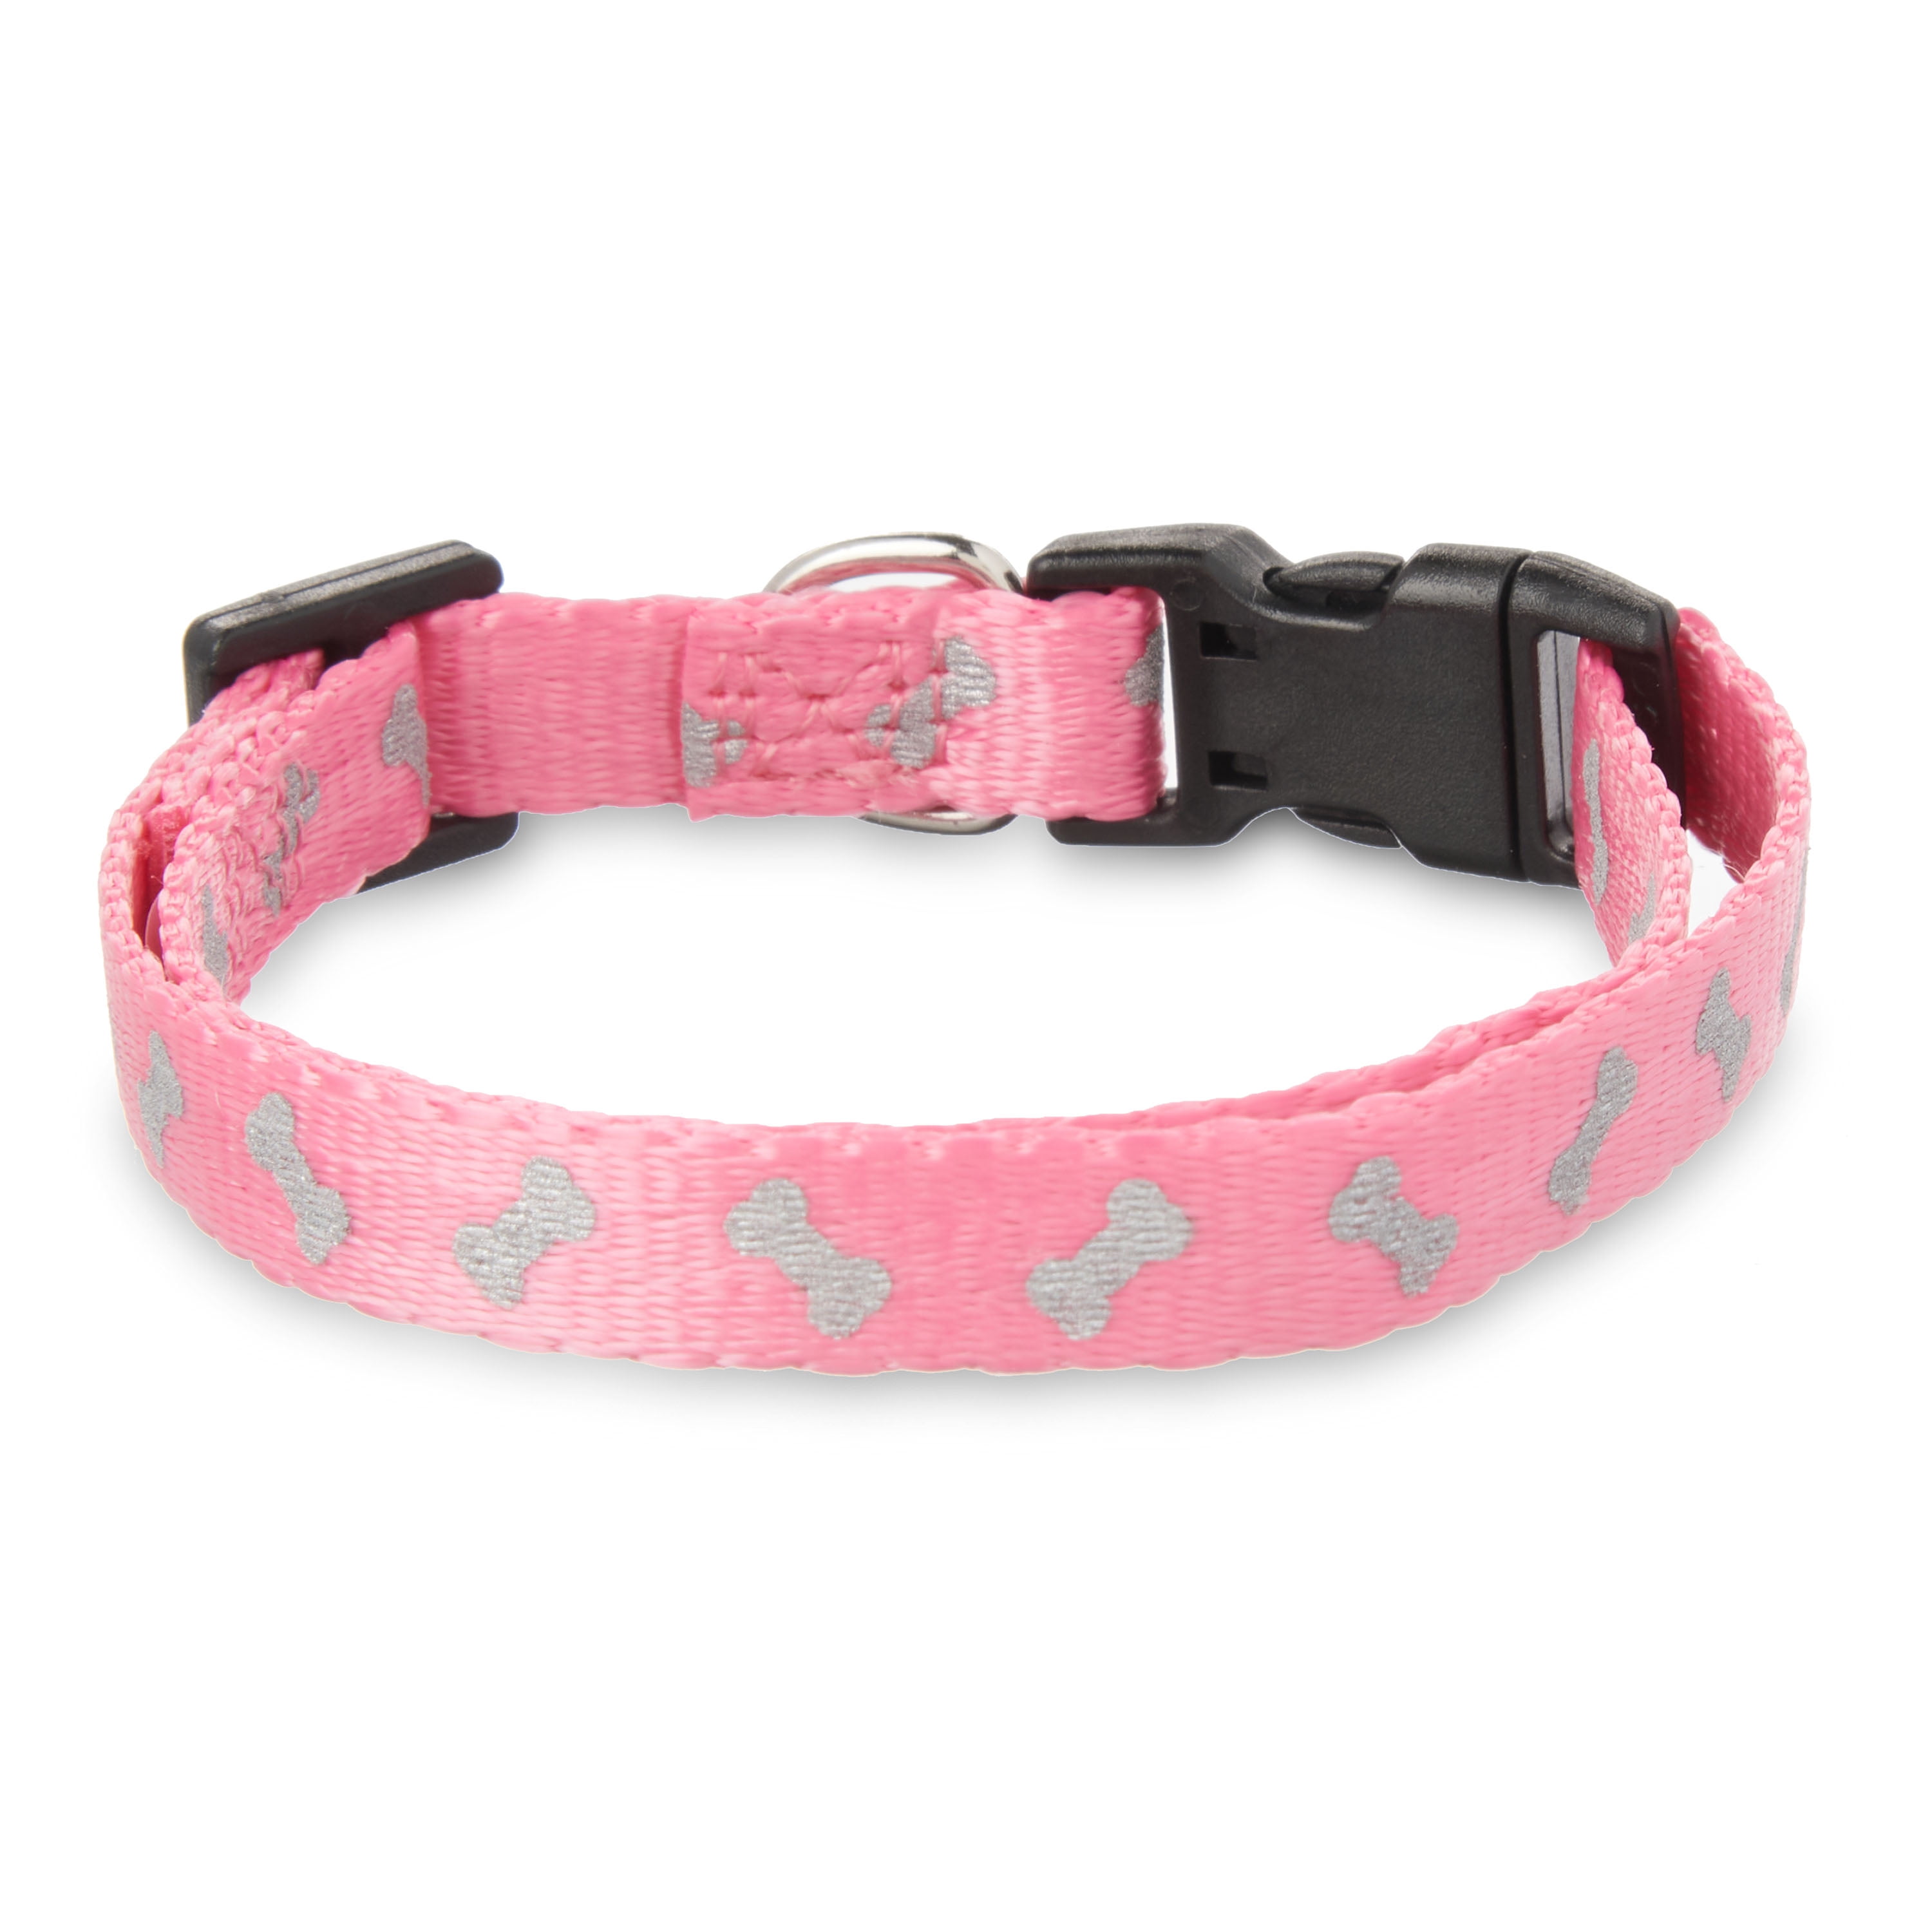 Cute Reflective Pet Dog Puppy Collars and Leads Leash with Bell for Small Dog BS 